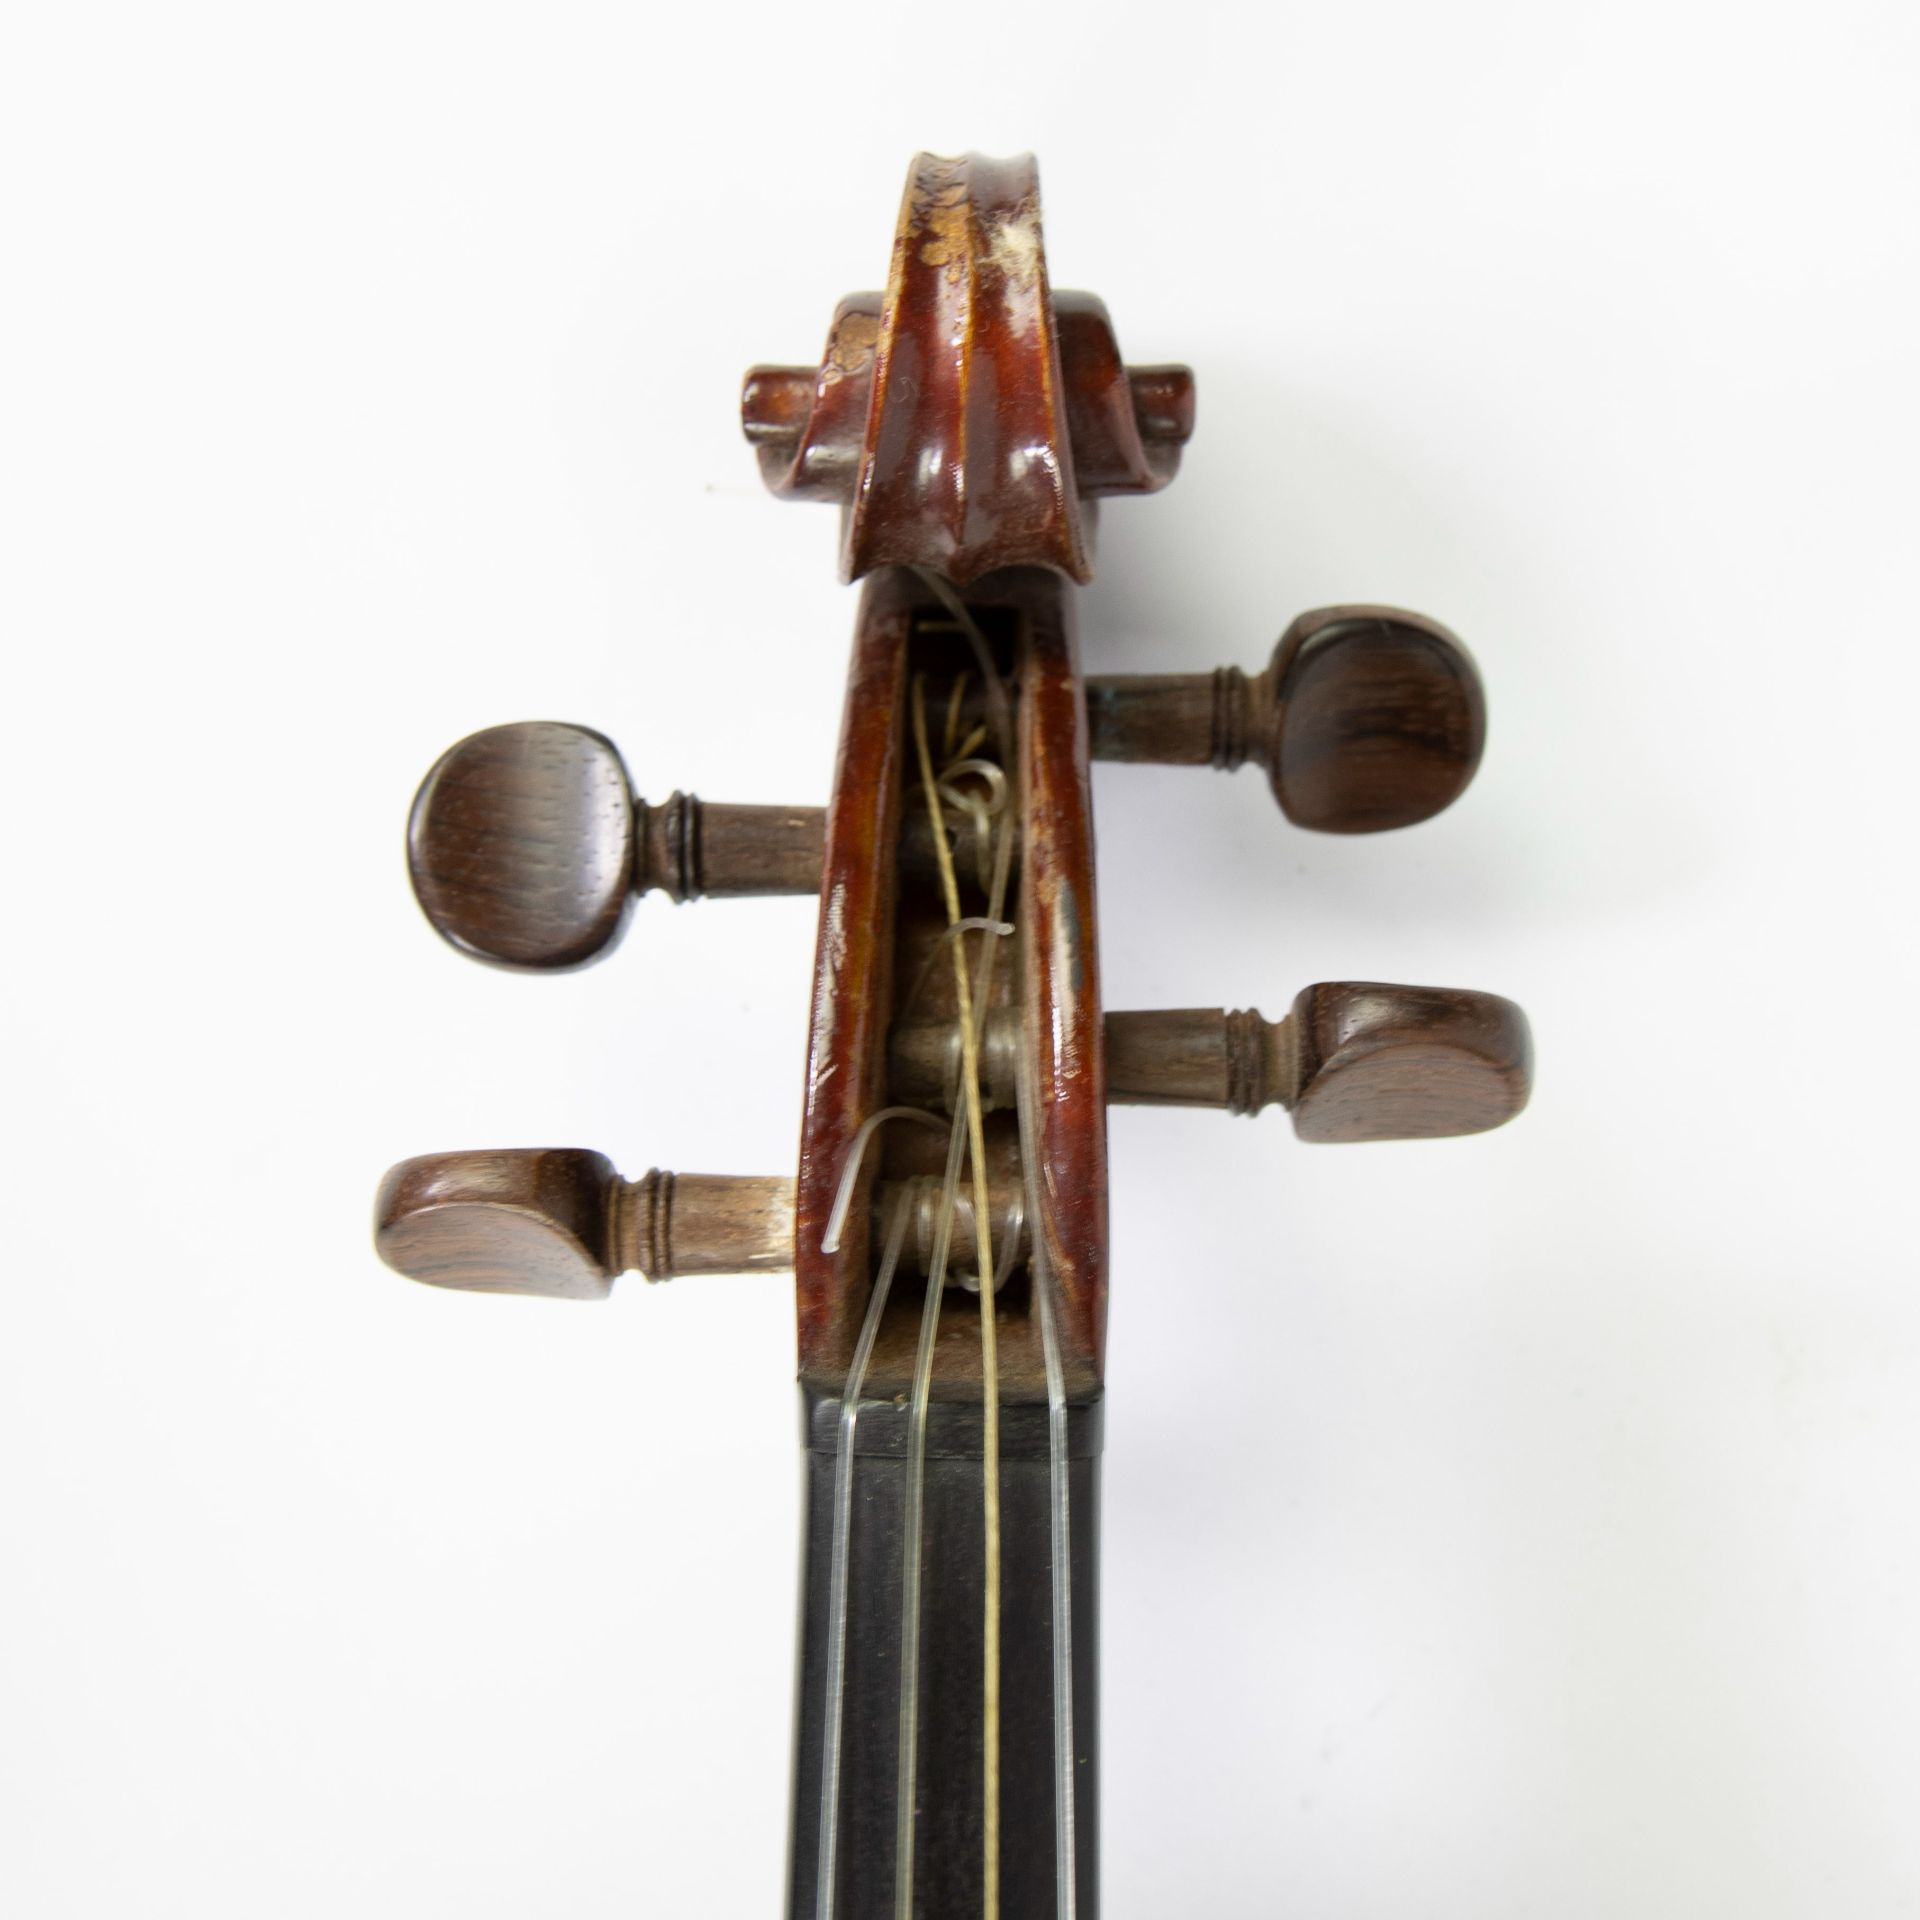 Belgian Violin handmade by Lucien Dolphyn, with violin case and bow - Image 6 of 6